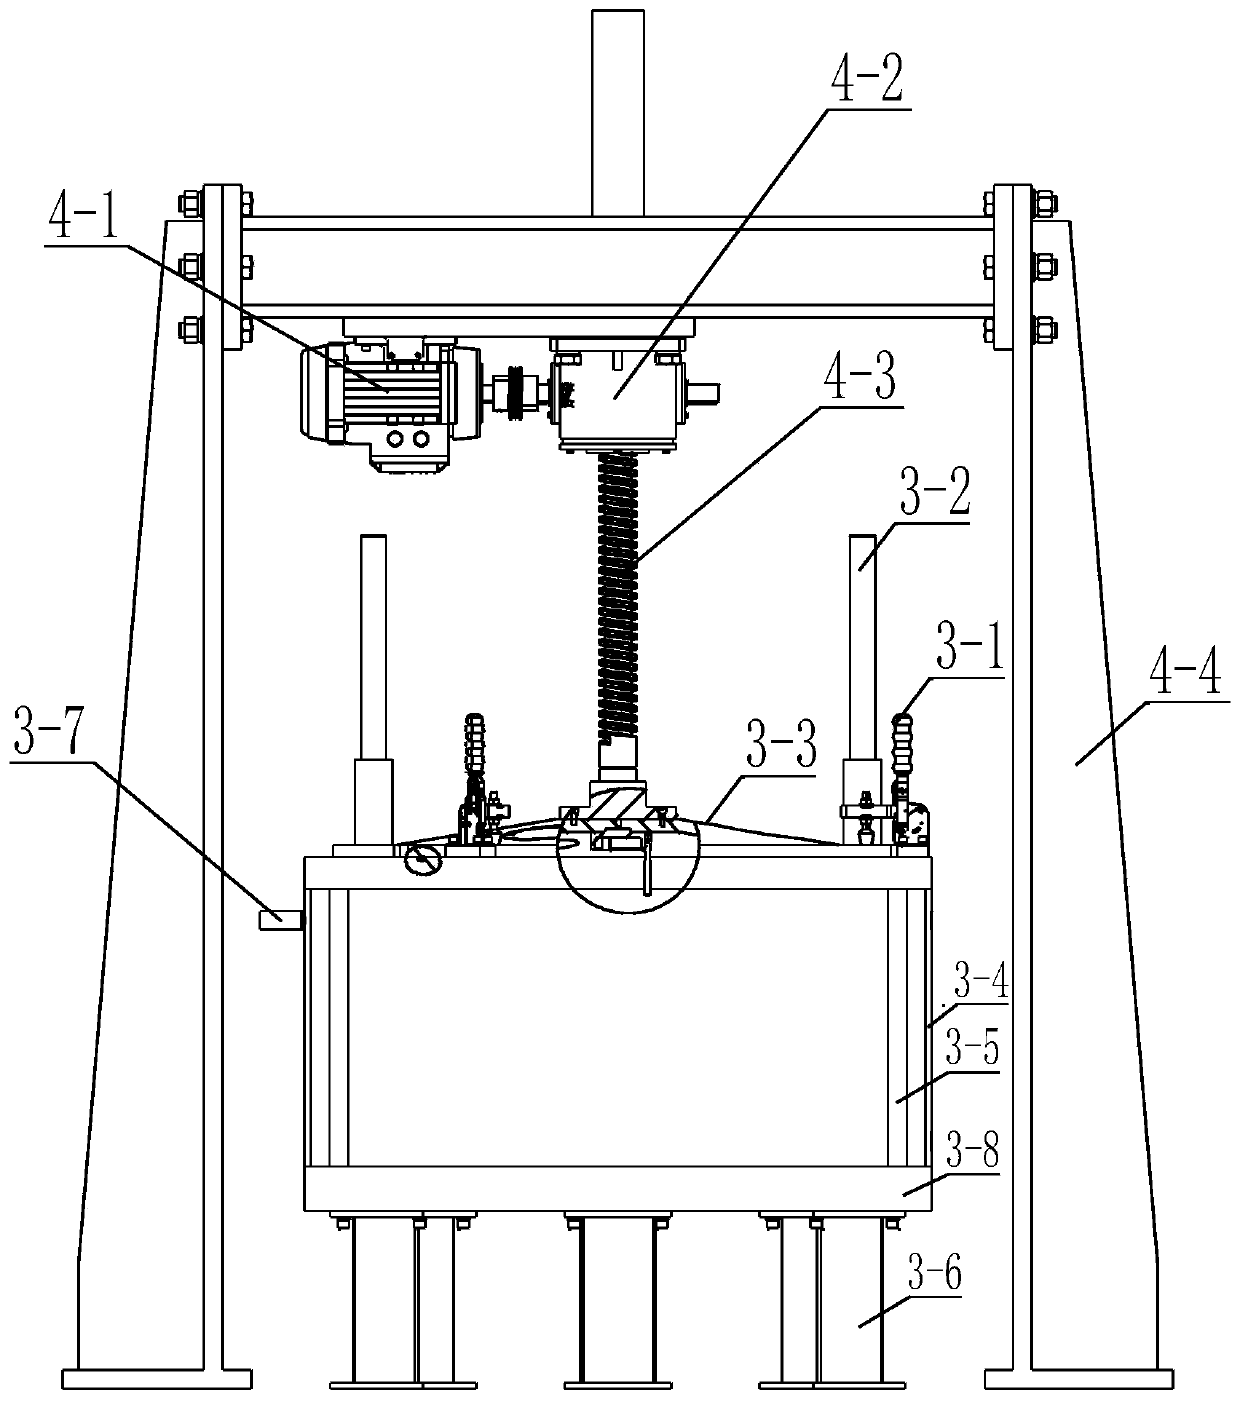 Centrifugal supergravity experimental device for material preparation and performance test